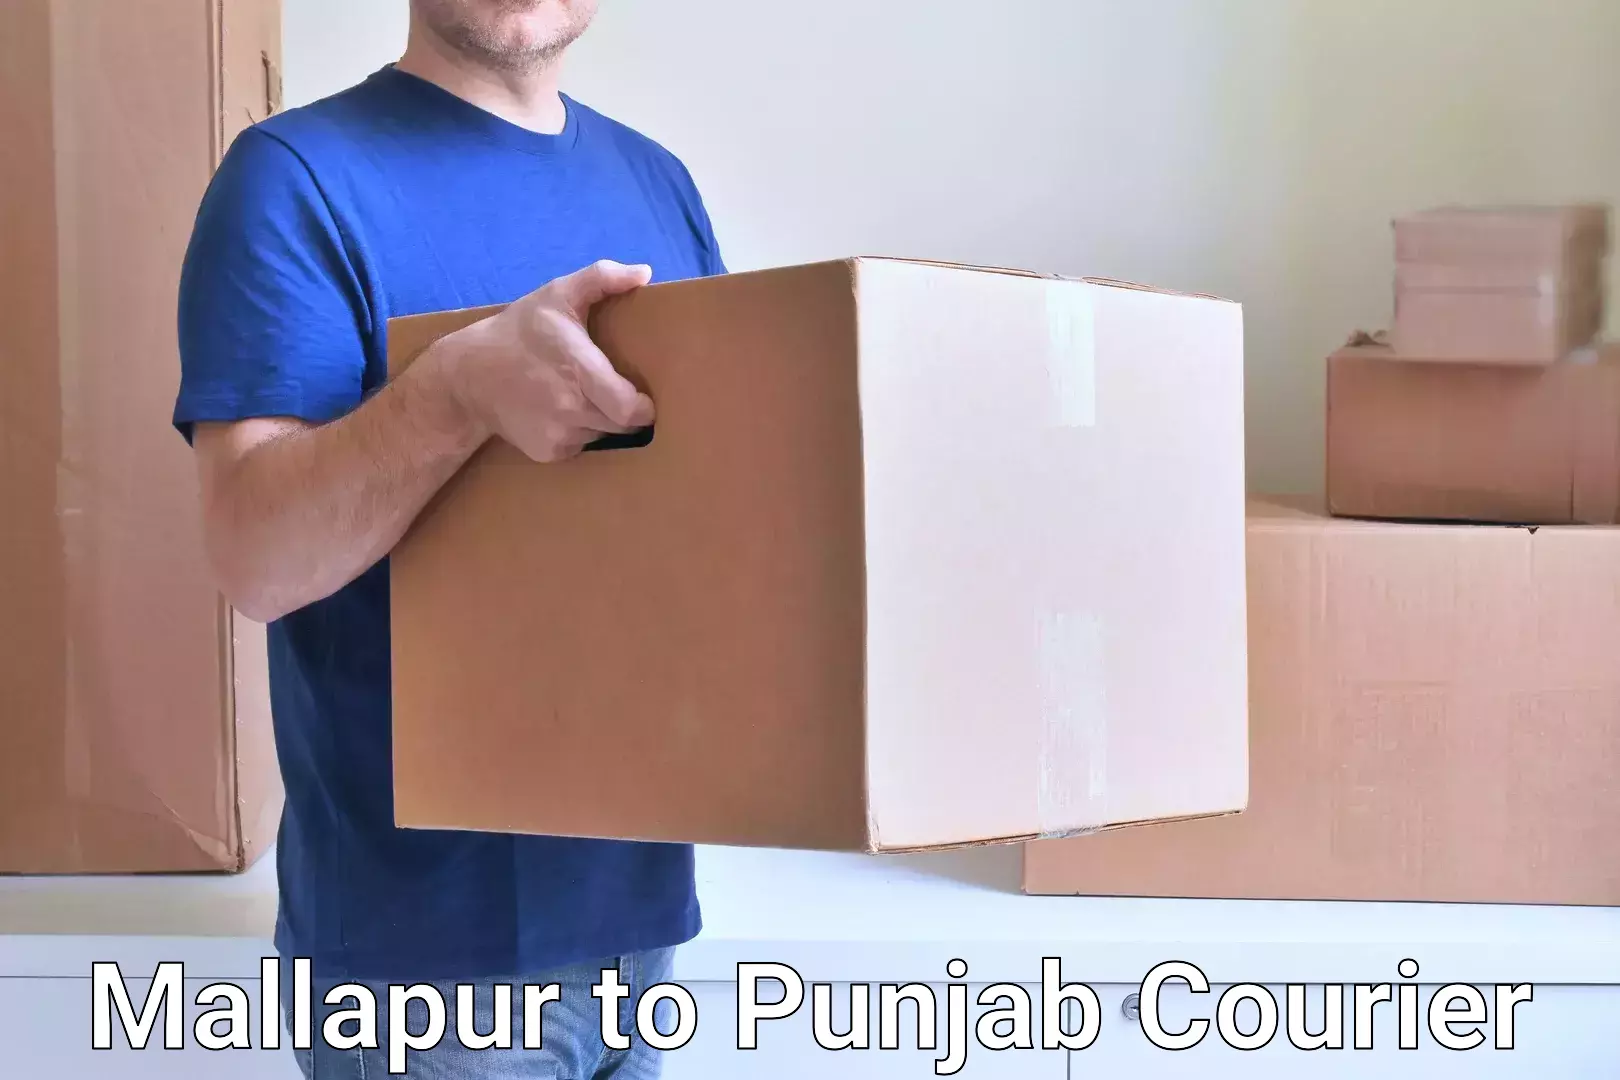 User-friendly courier app Mallapur to Patiala